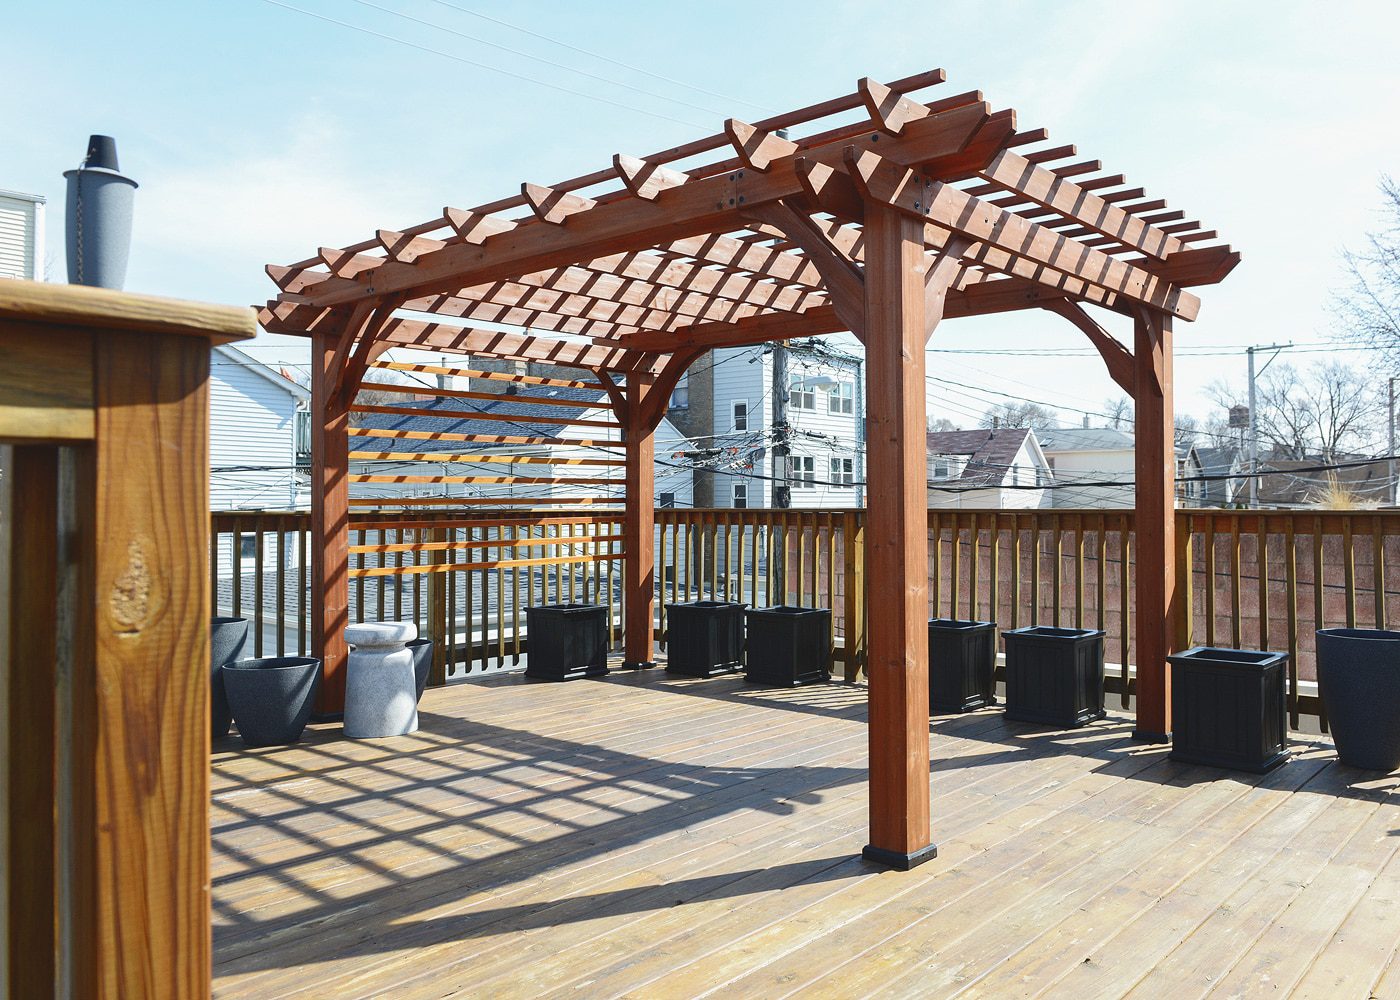 A DIY pergola for a rooftop patio | via Yellow Brick Home, in partnership with Lowe's Home Improvement